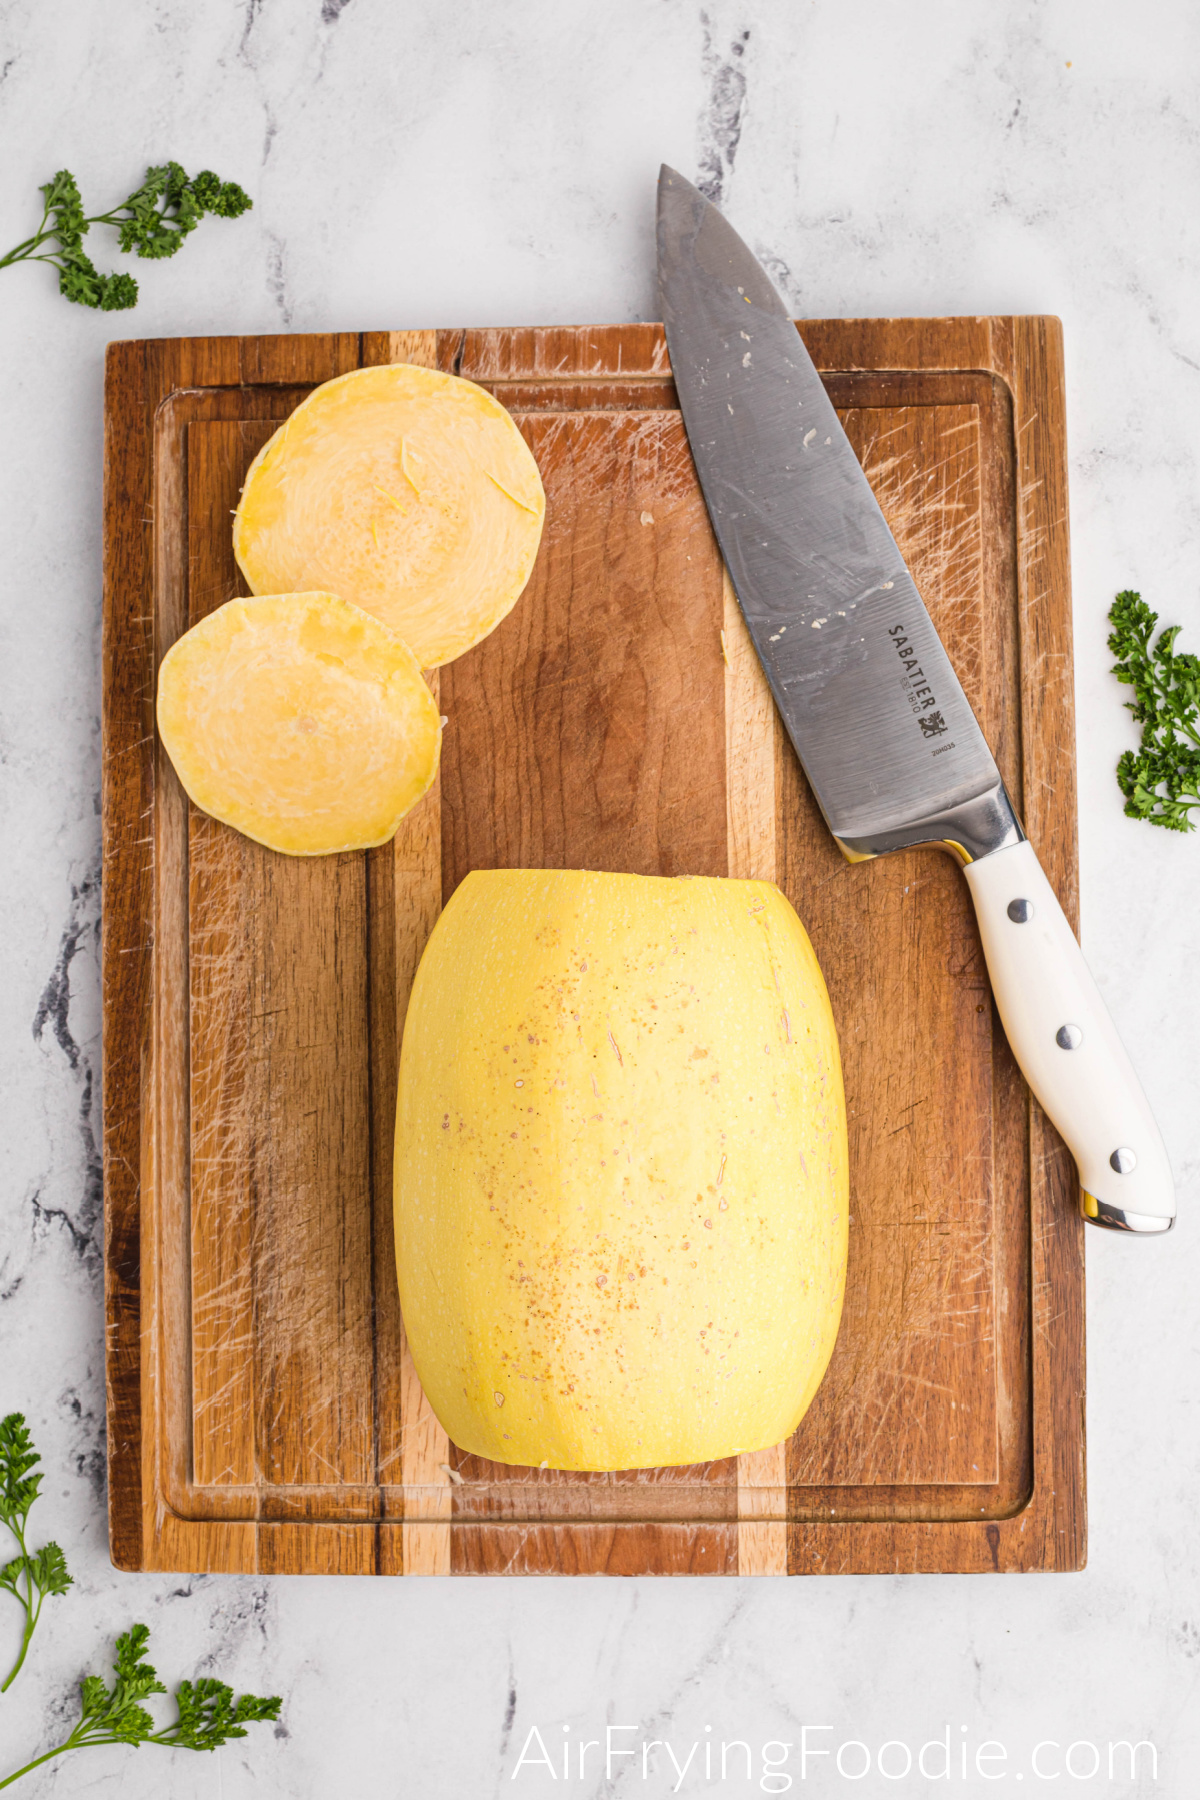 Spaghetti squash with ends cut, on a cutting board with a knife.